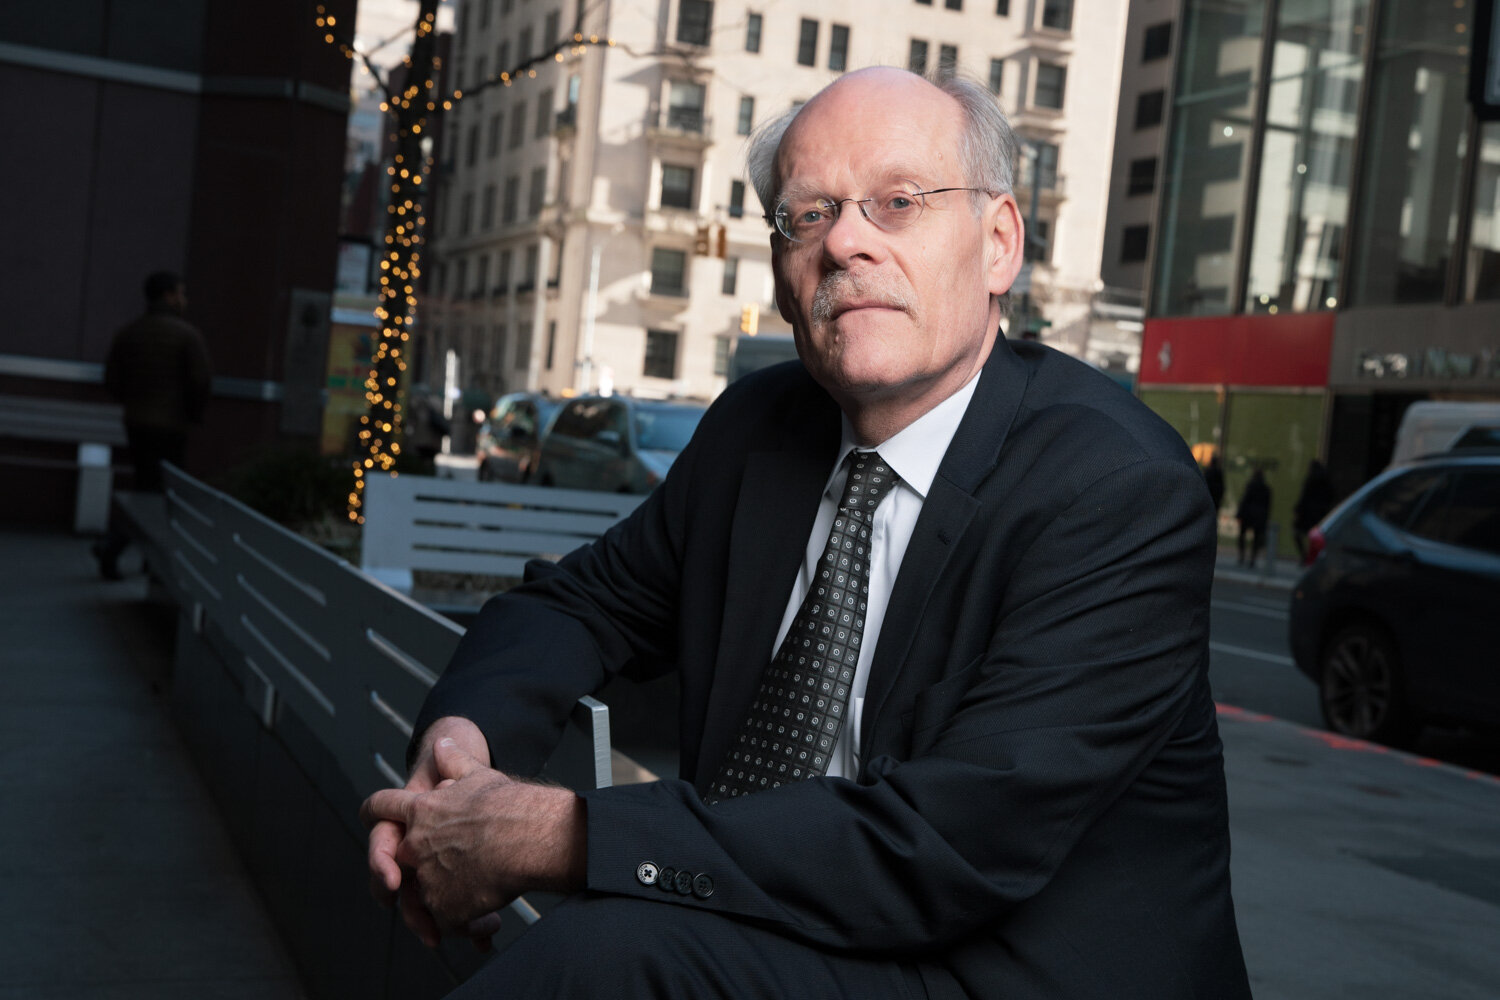  20190219 New York City  Stefan Ingves, at the time governor of the central bank of Sweden. Shot for Dagens Industri in New York. 